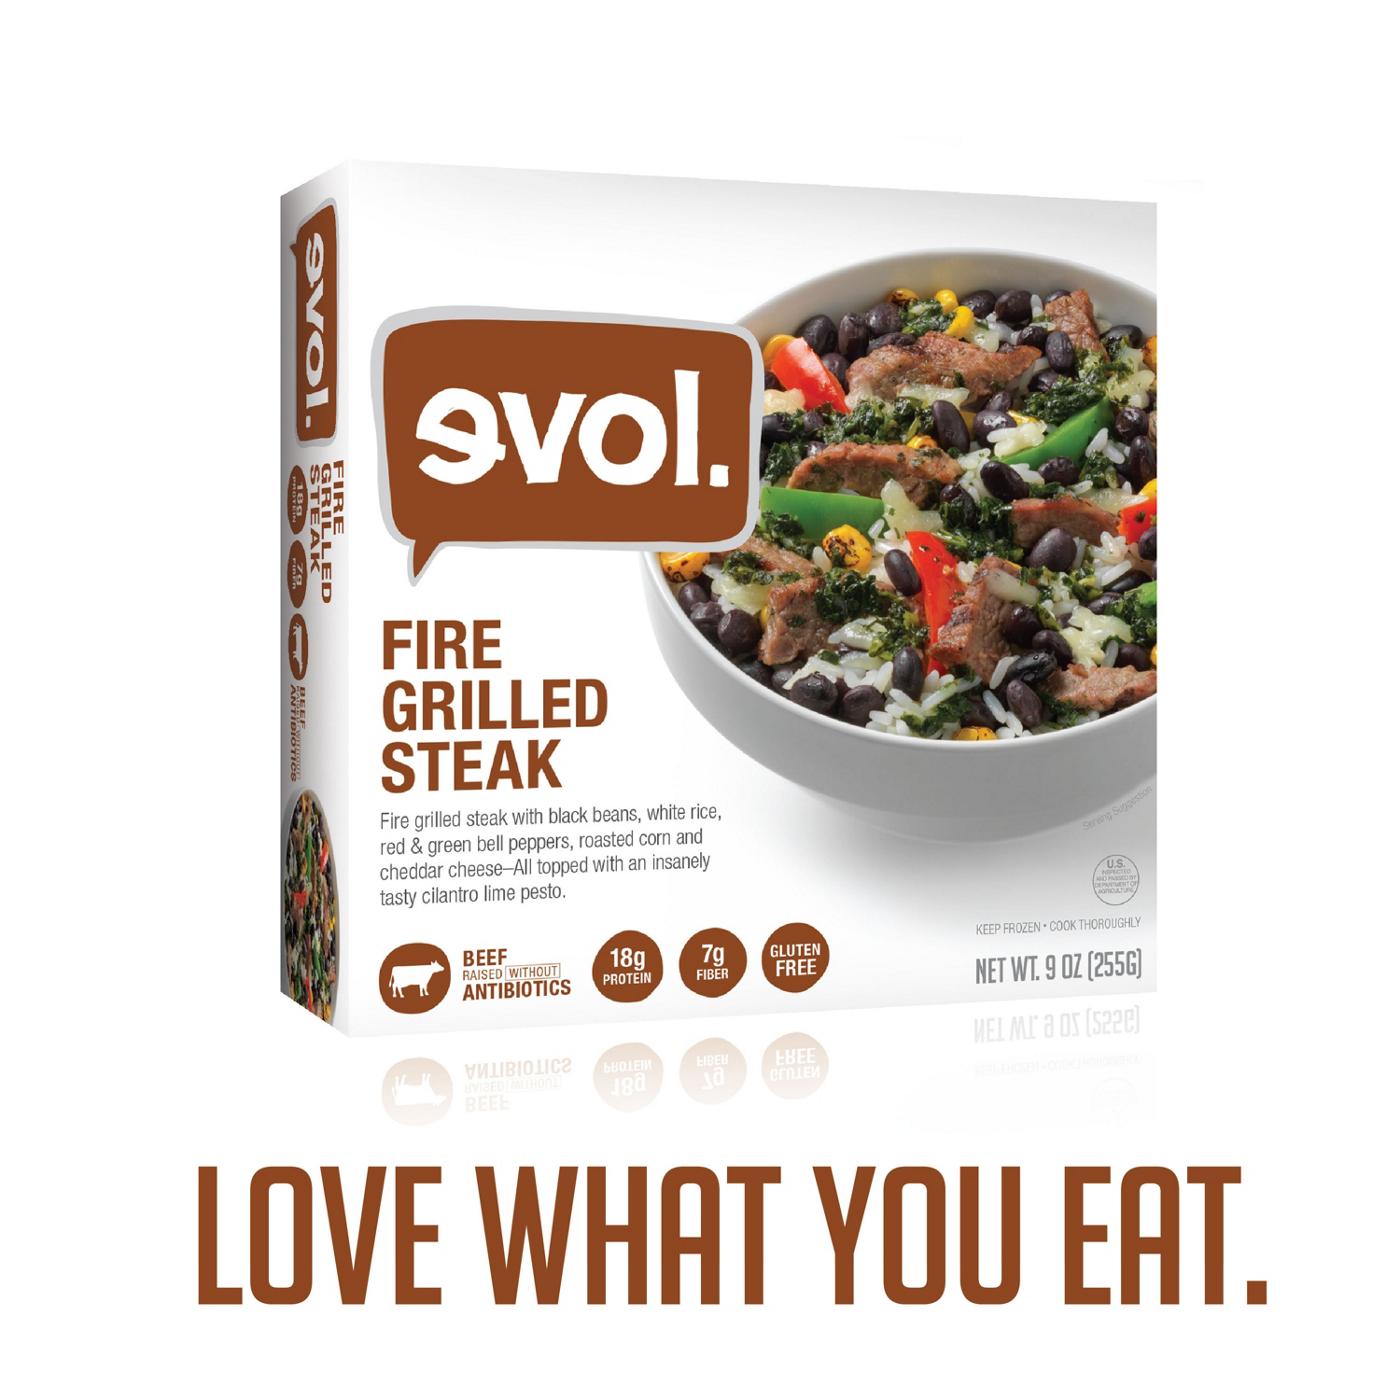 Evol 18g Protein Fire-Grilled Steak Frozen Meal; image 4 of 7